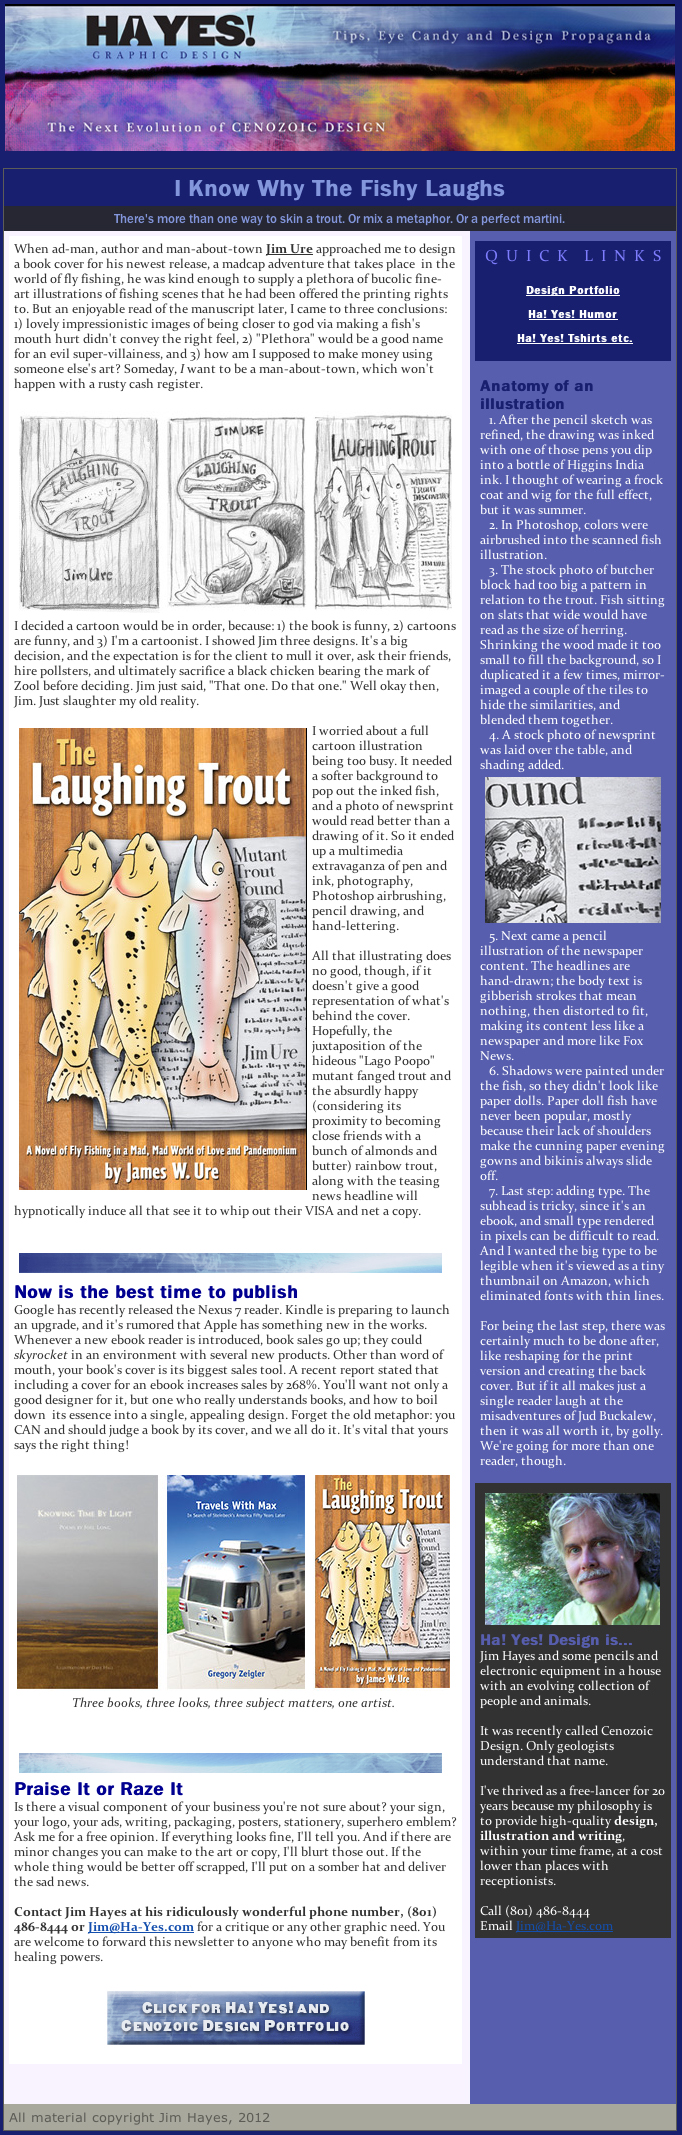 newsletter #8 laughing trout ha! yes!